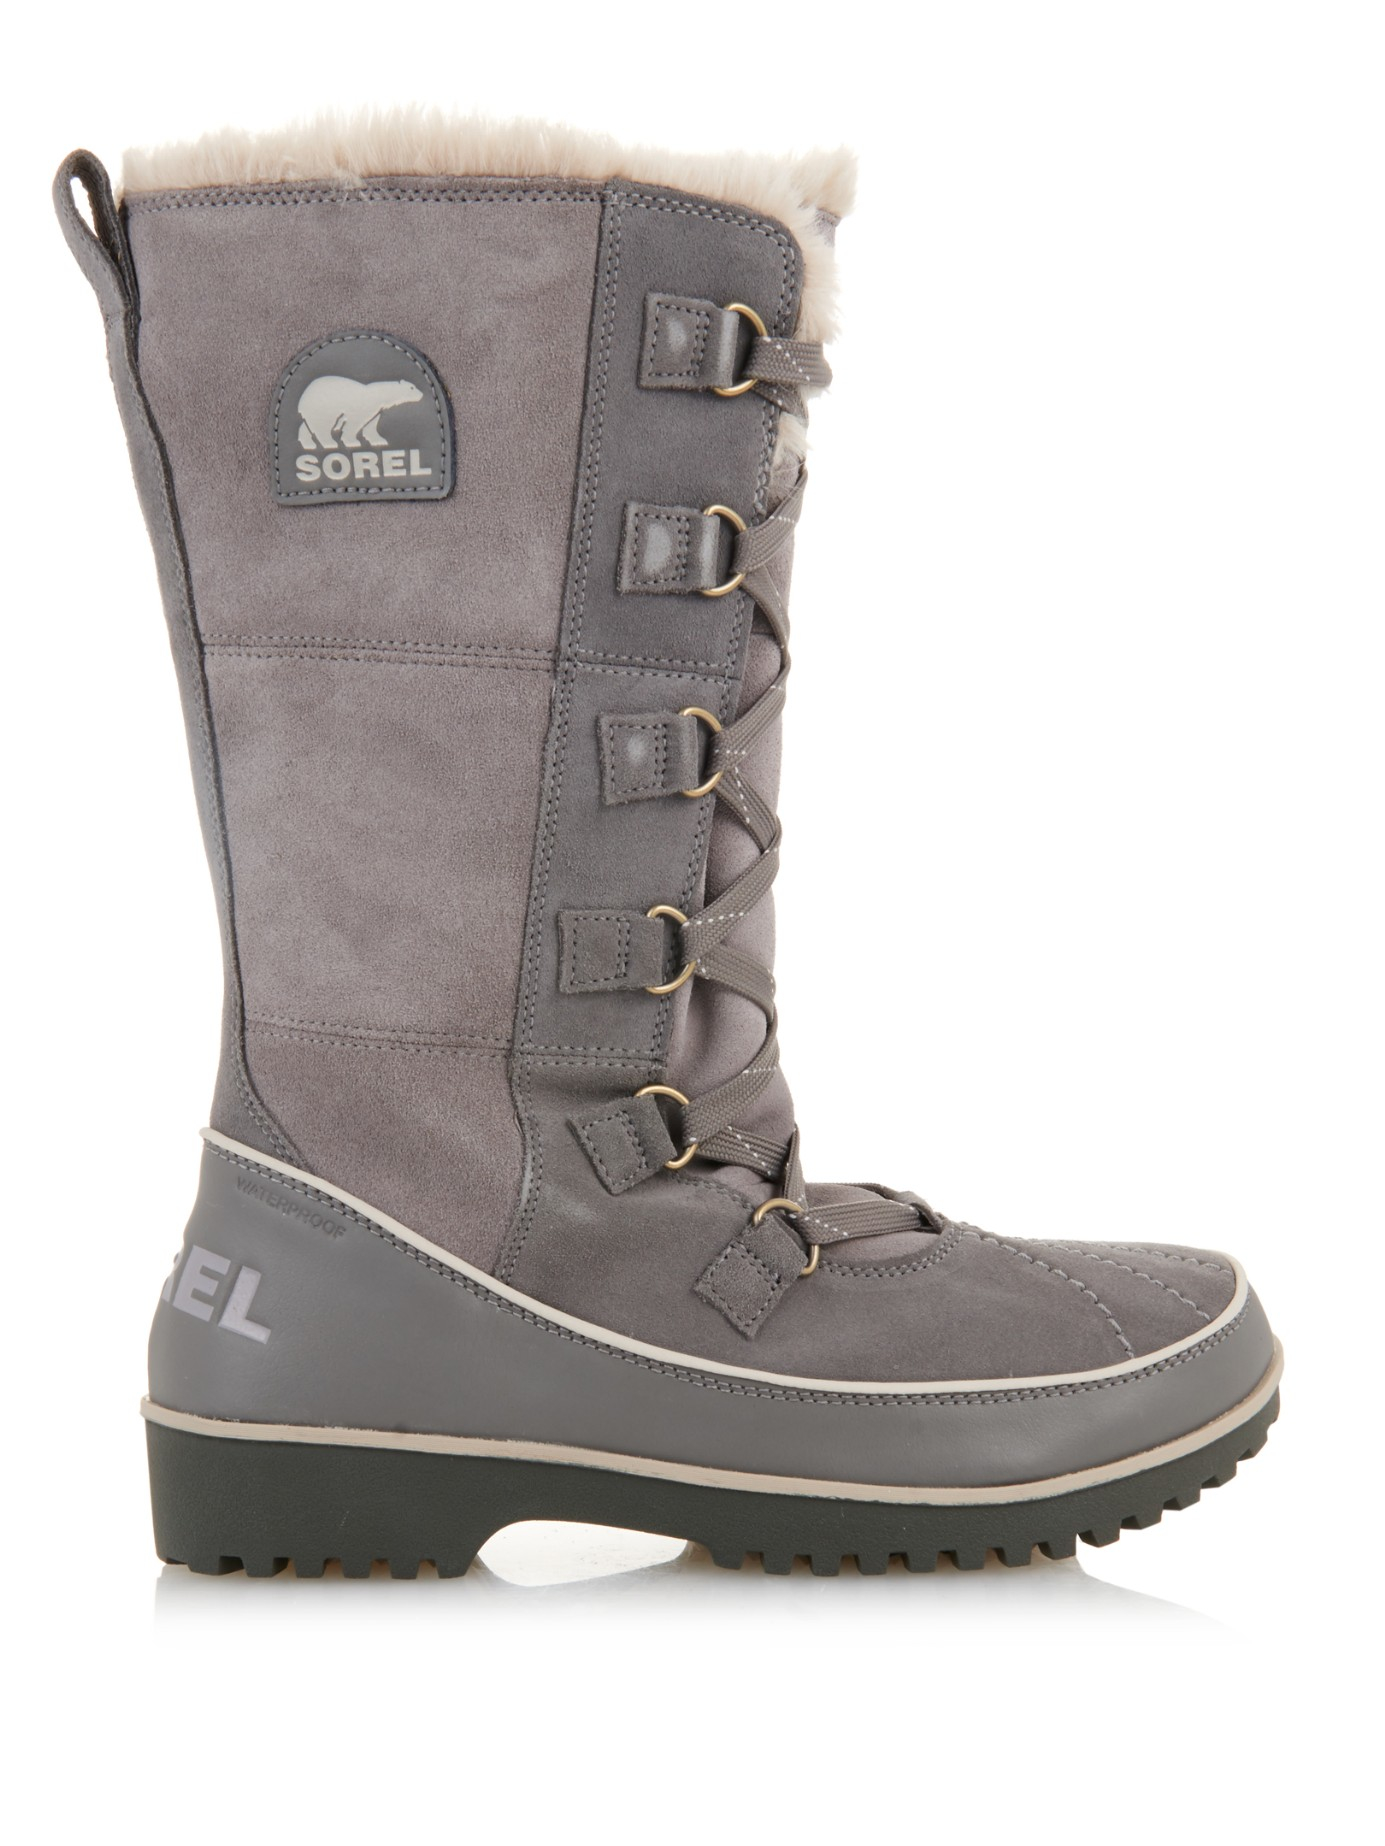 Sorel Boots Gray Finland, SAVE 53% - aveclumiere.com